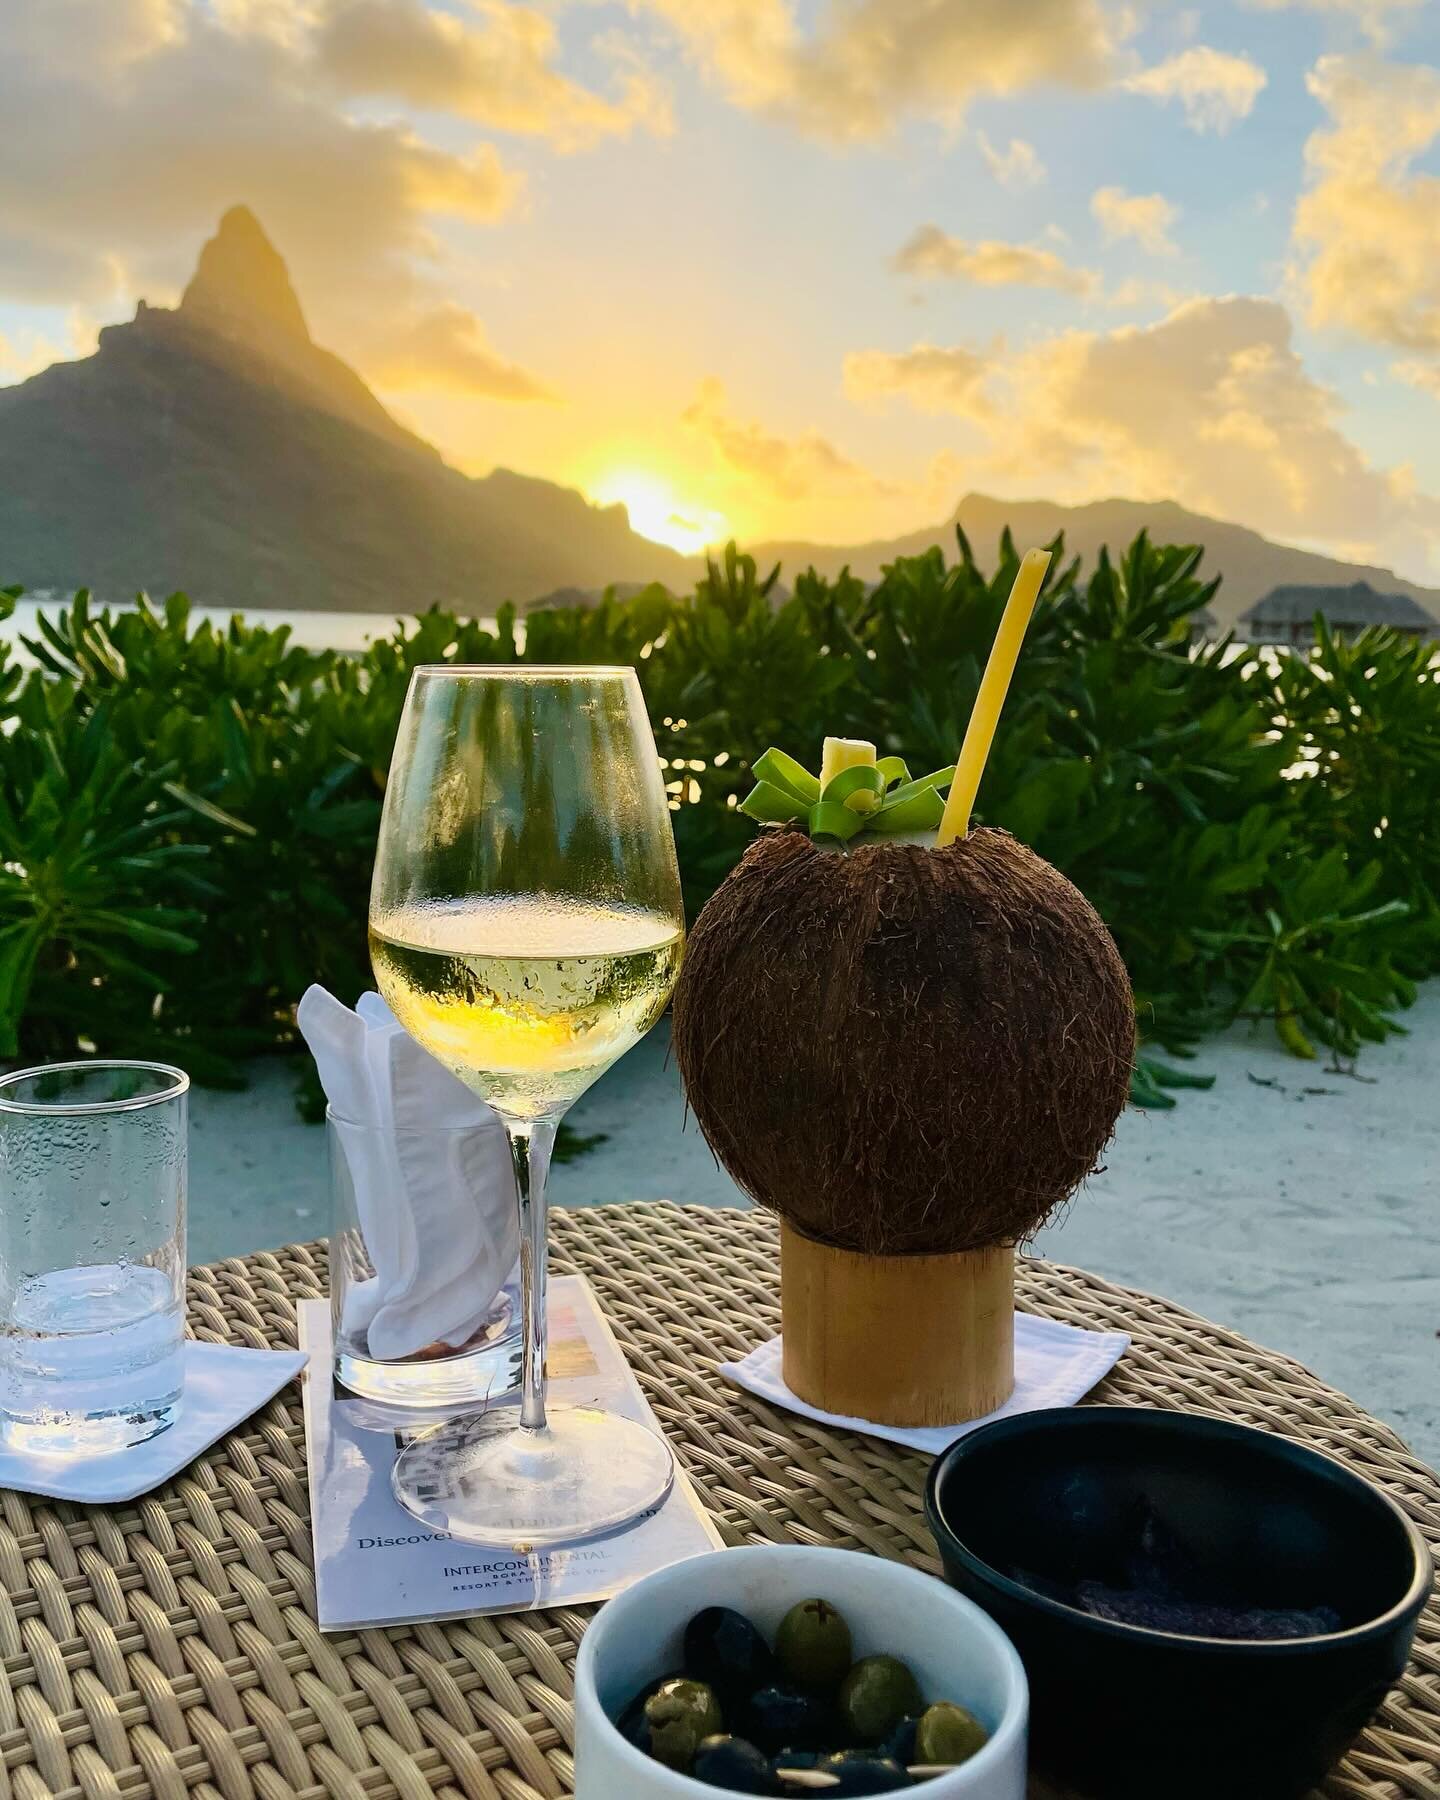 It&rsquo;s not too late to book a sunny  getaway for your Valentine this year! ☀️🌴💗 DM us to give the best gift: TRAVEL! #borabora #intercontinentalborabora #cadencetravel #luxurytravel #traveladvisor  Image: our travel to Bora Bora 2021